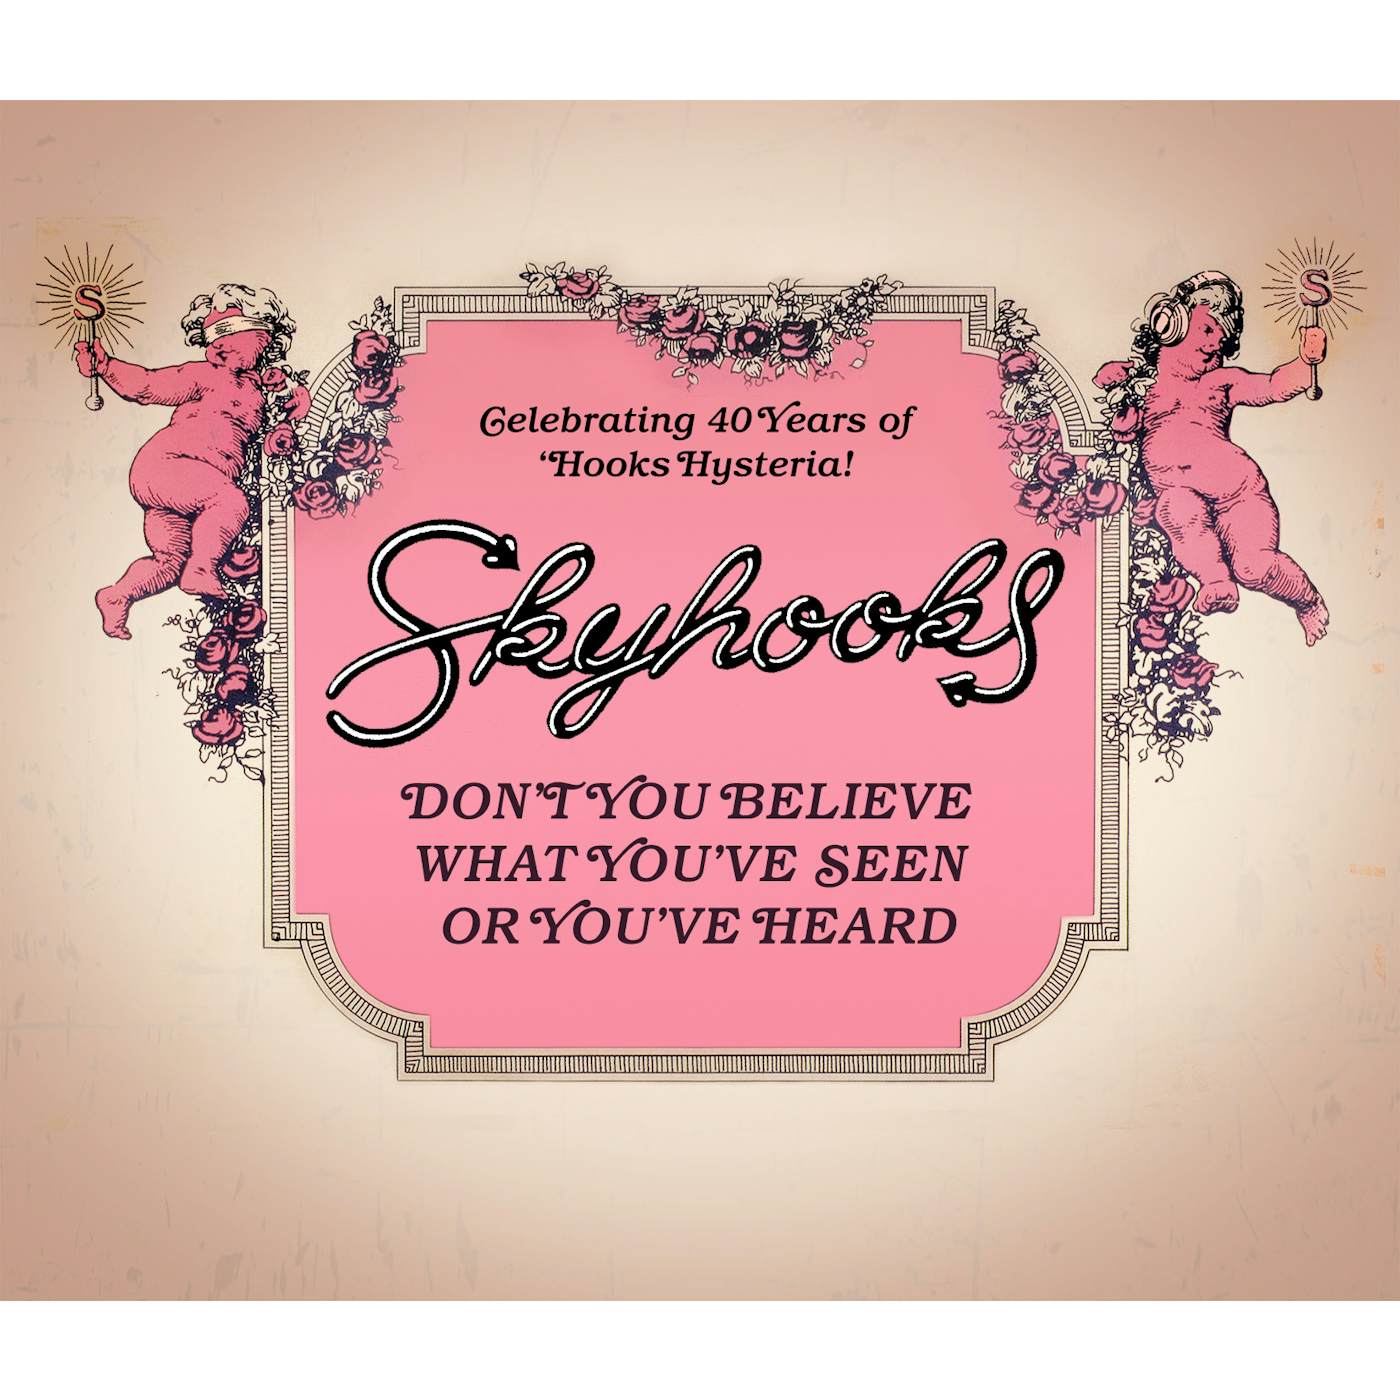 Skyhooks DON'T YOU BELIEVE WHAT YOU'VE SEEN OR YOU'VE HEARD CD